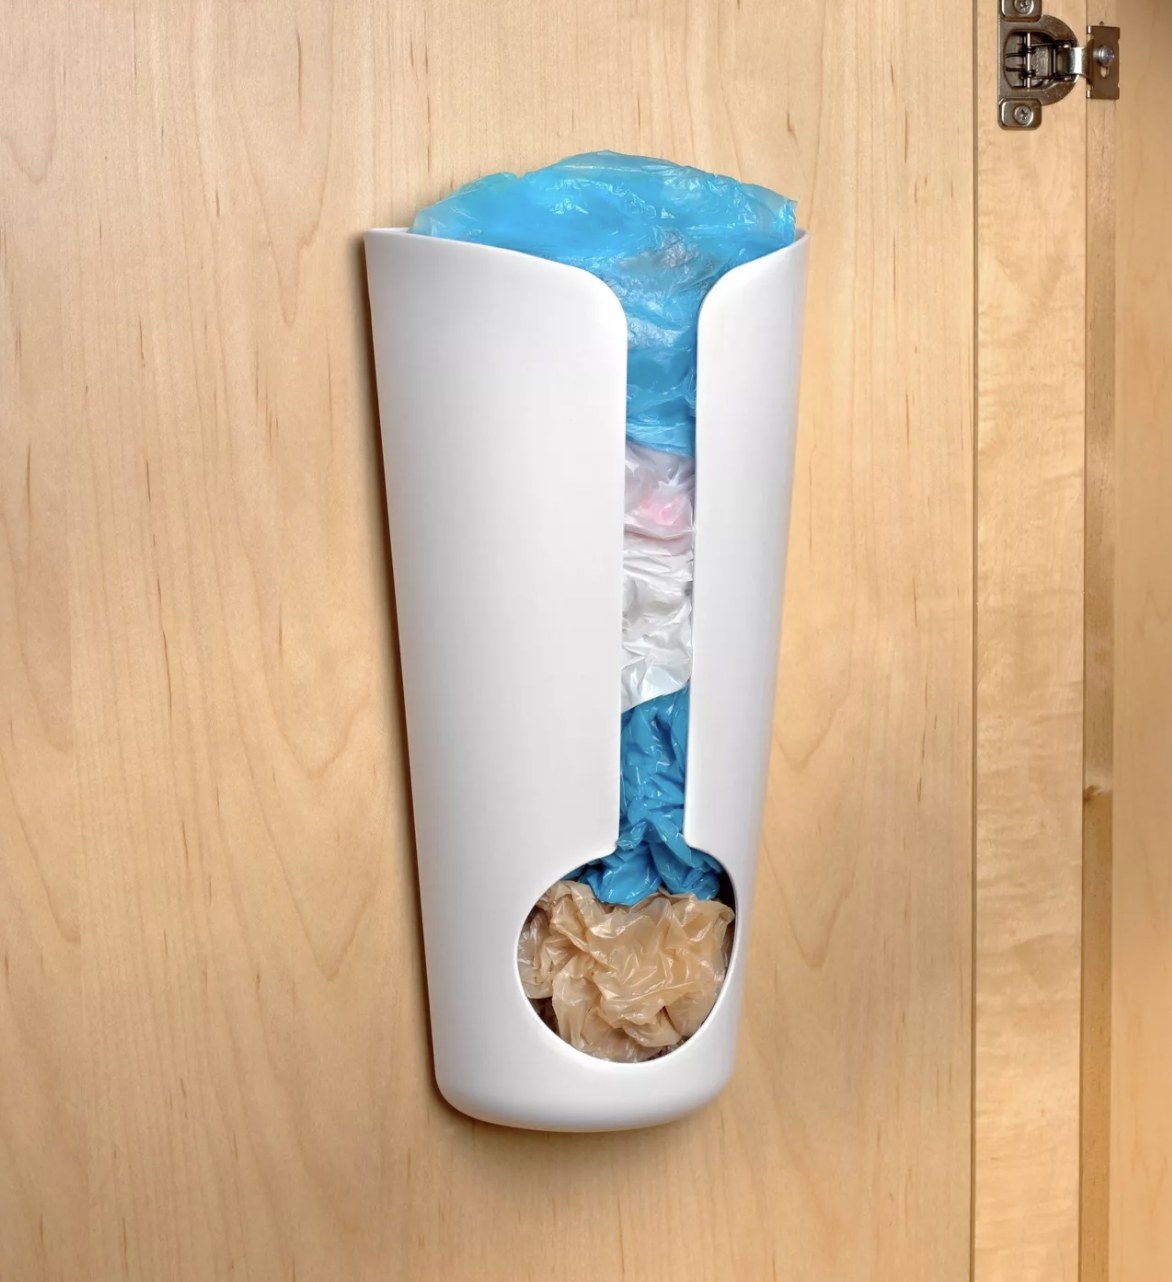 The white plastic bag holder is attached to a light wooden cabinet and structurally has a thin rectangular slot that widens into a spherical shape and is holding various colored plastic bags